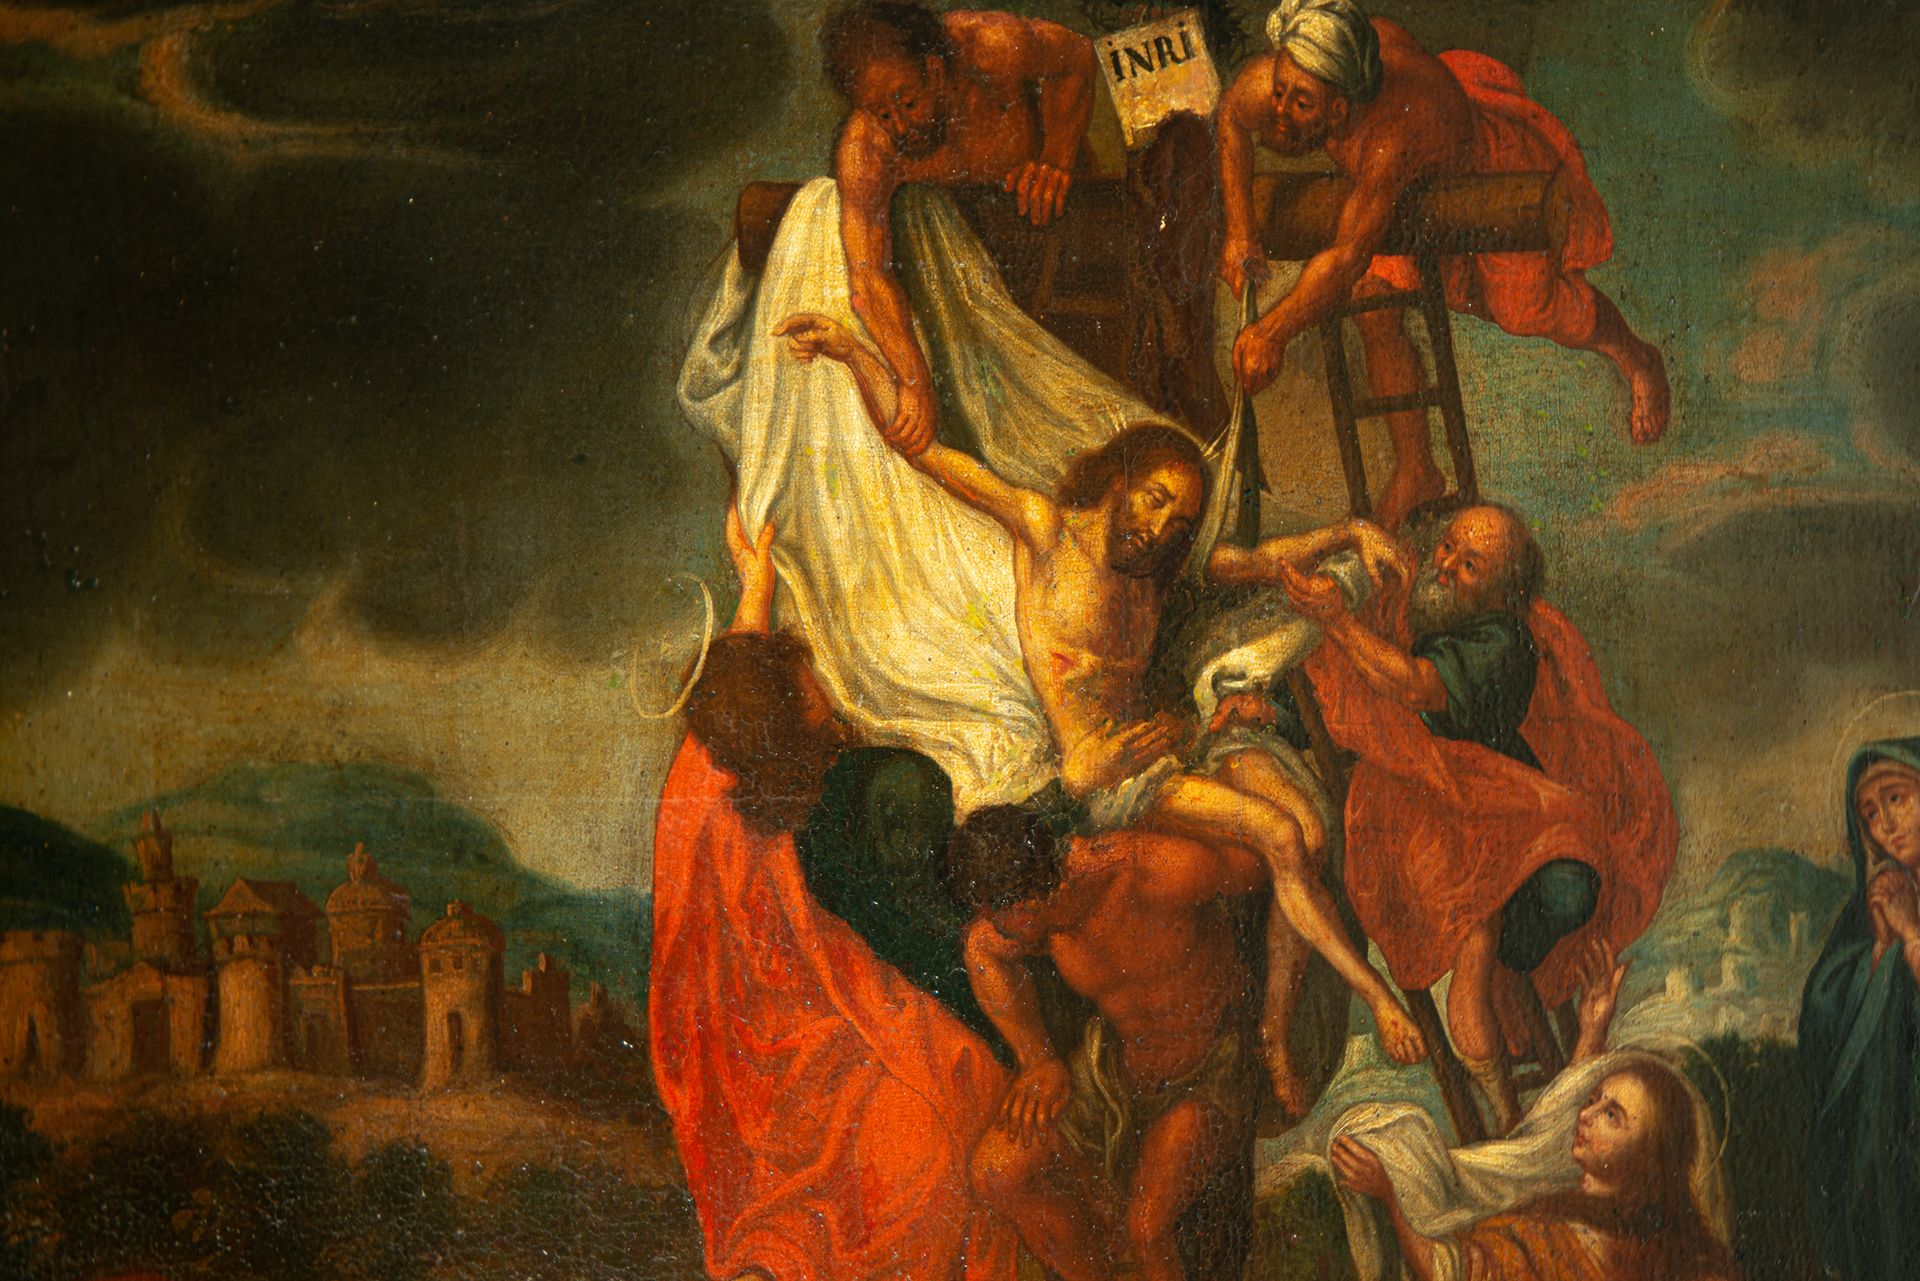 Jesus Descending from the Cross, Spanish school of the 17th century - Image 6 of 11